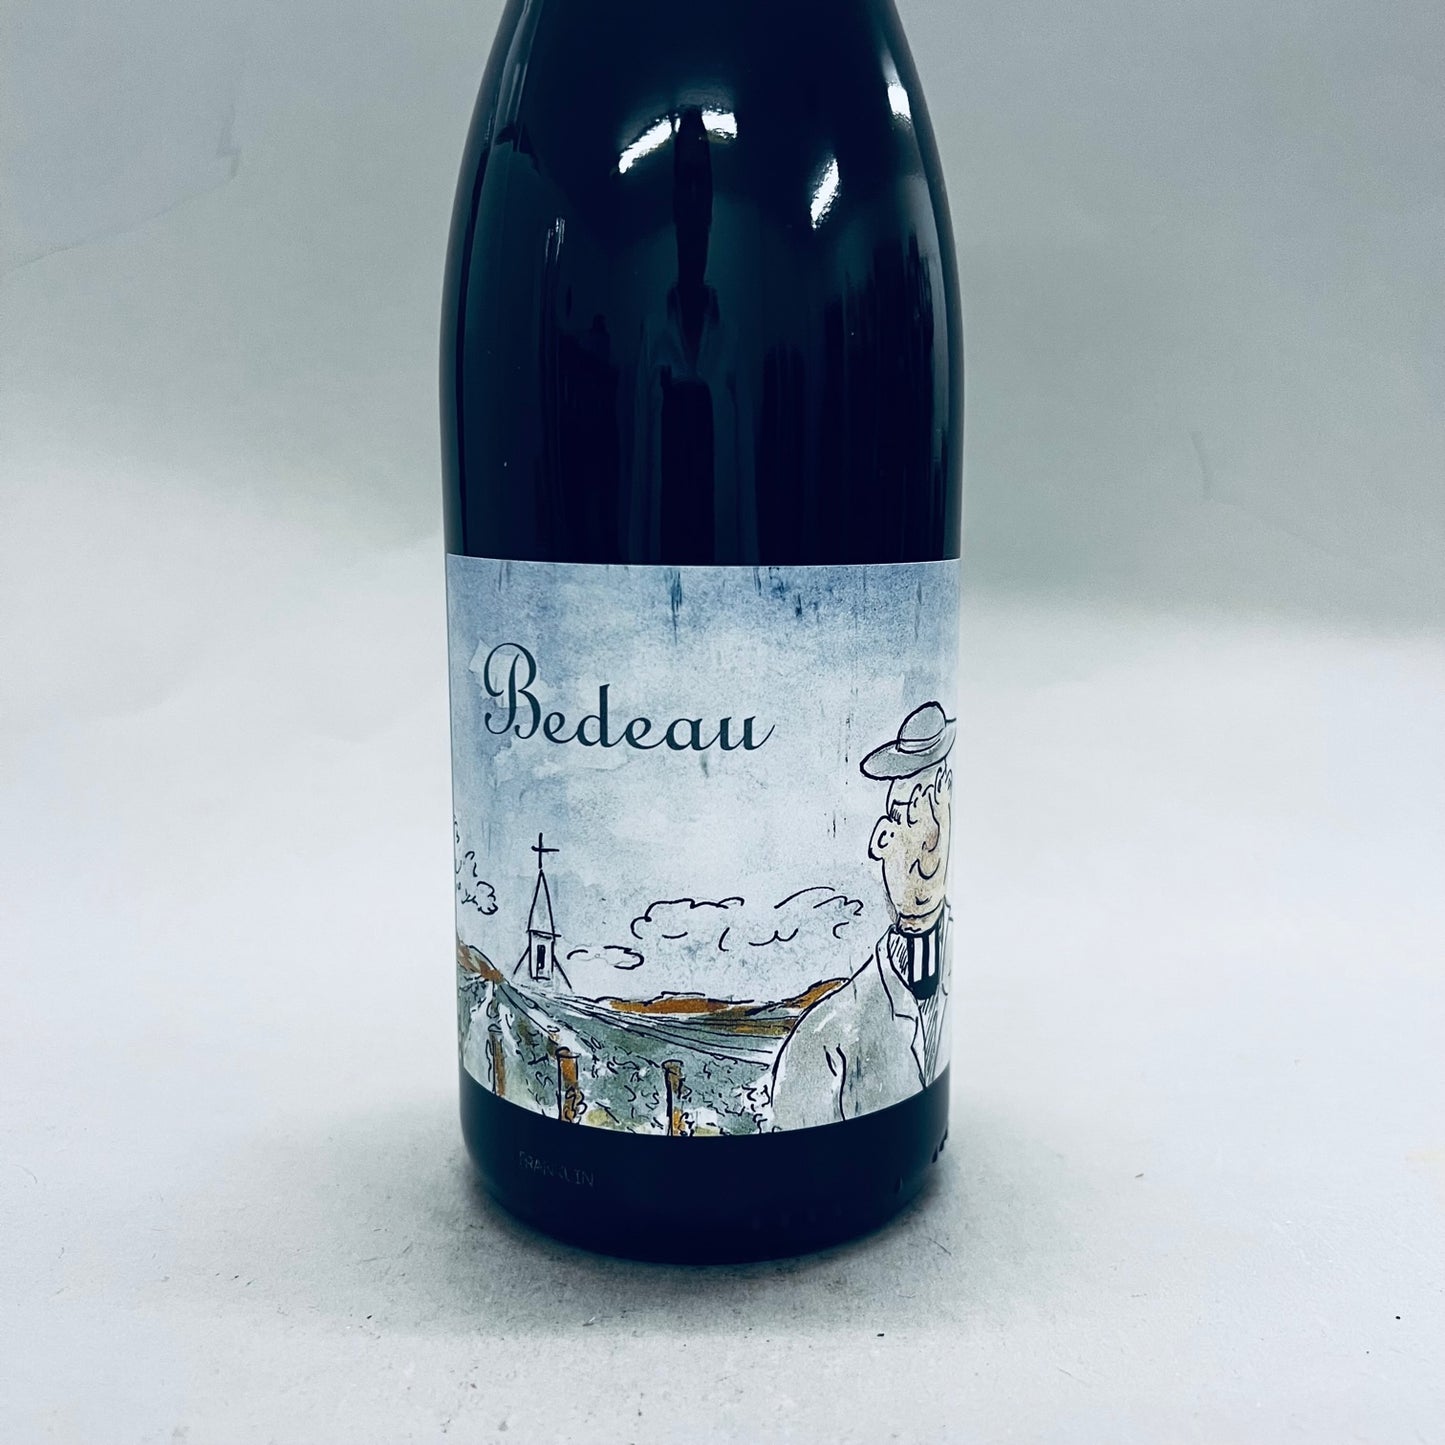 2021 Frederic Cossard Bedeau Bourgogne Rouge